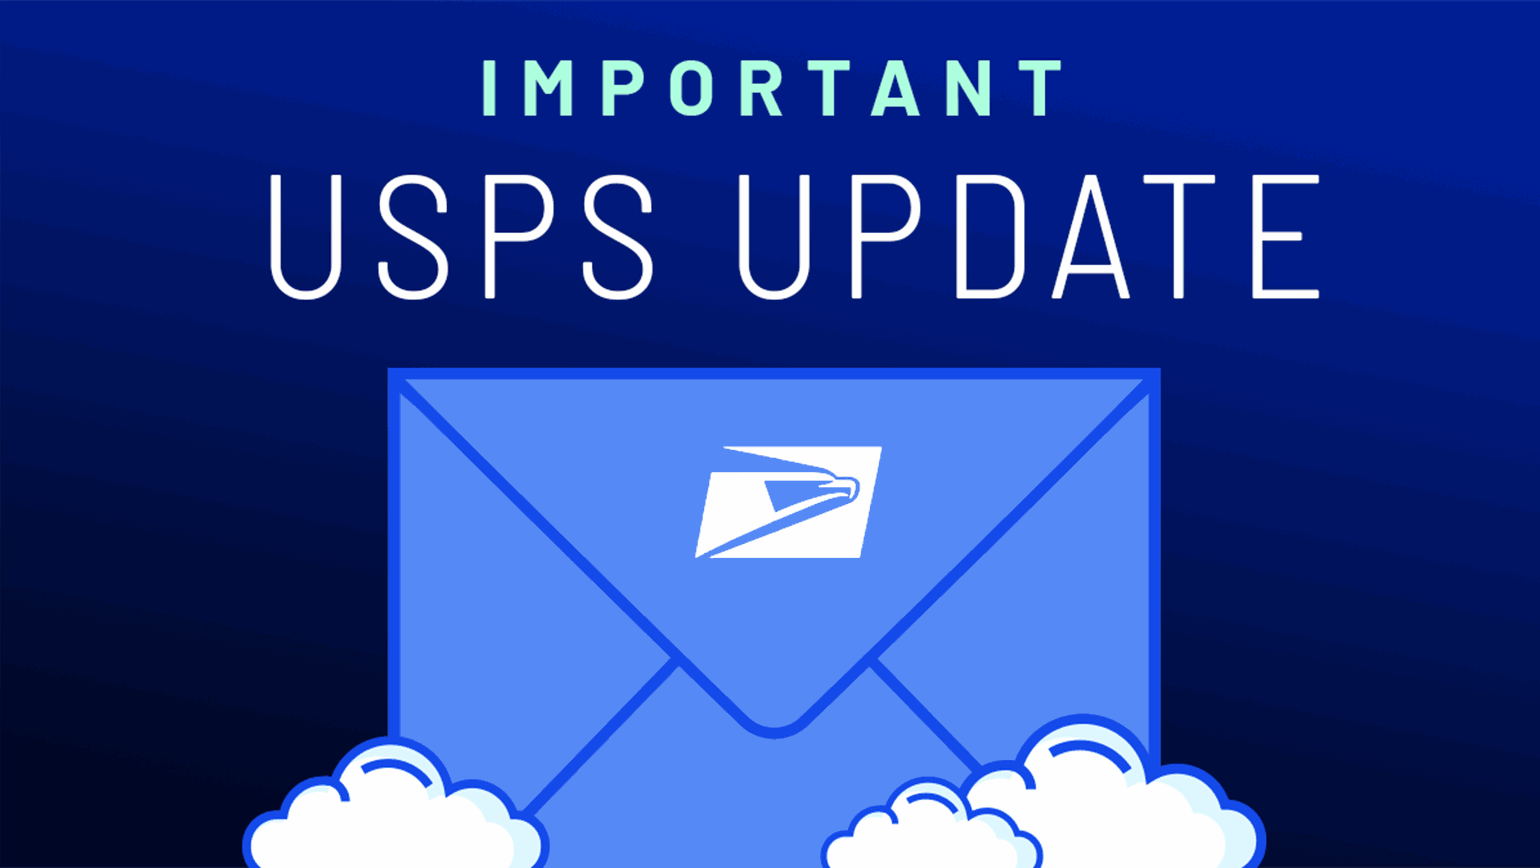 USPS Updates and Price Increase